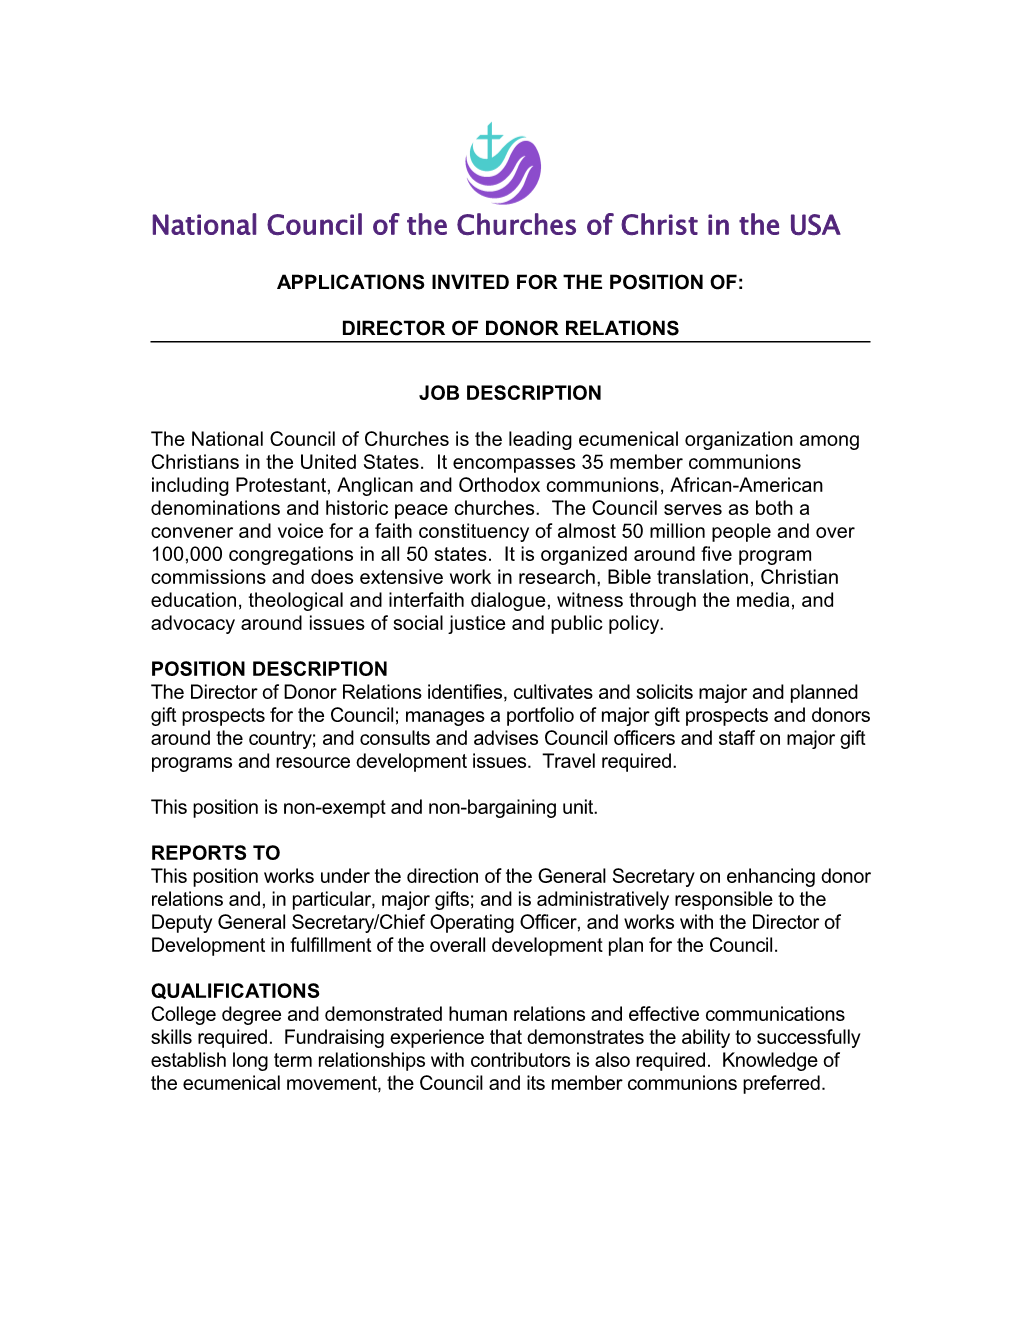 The National Council of the Churches of Christ in the USA